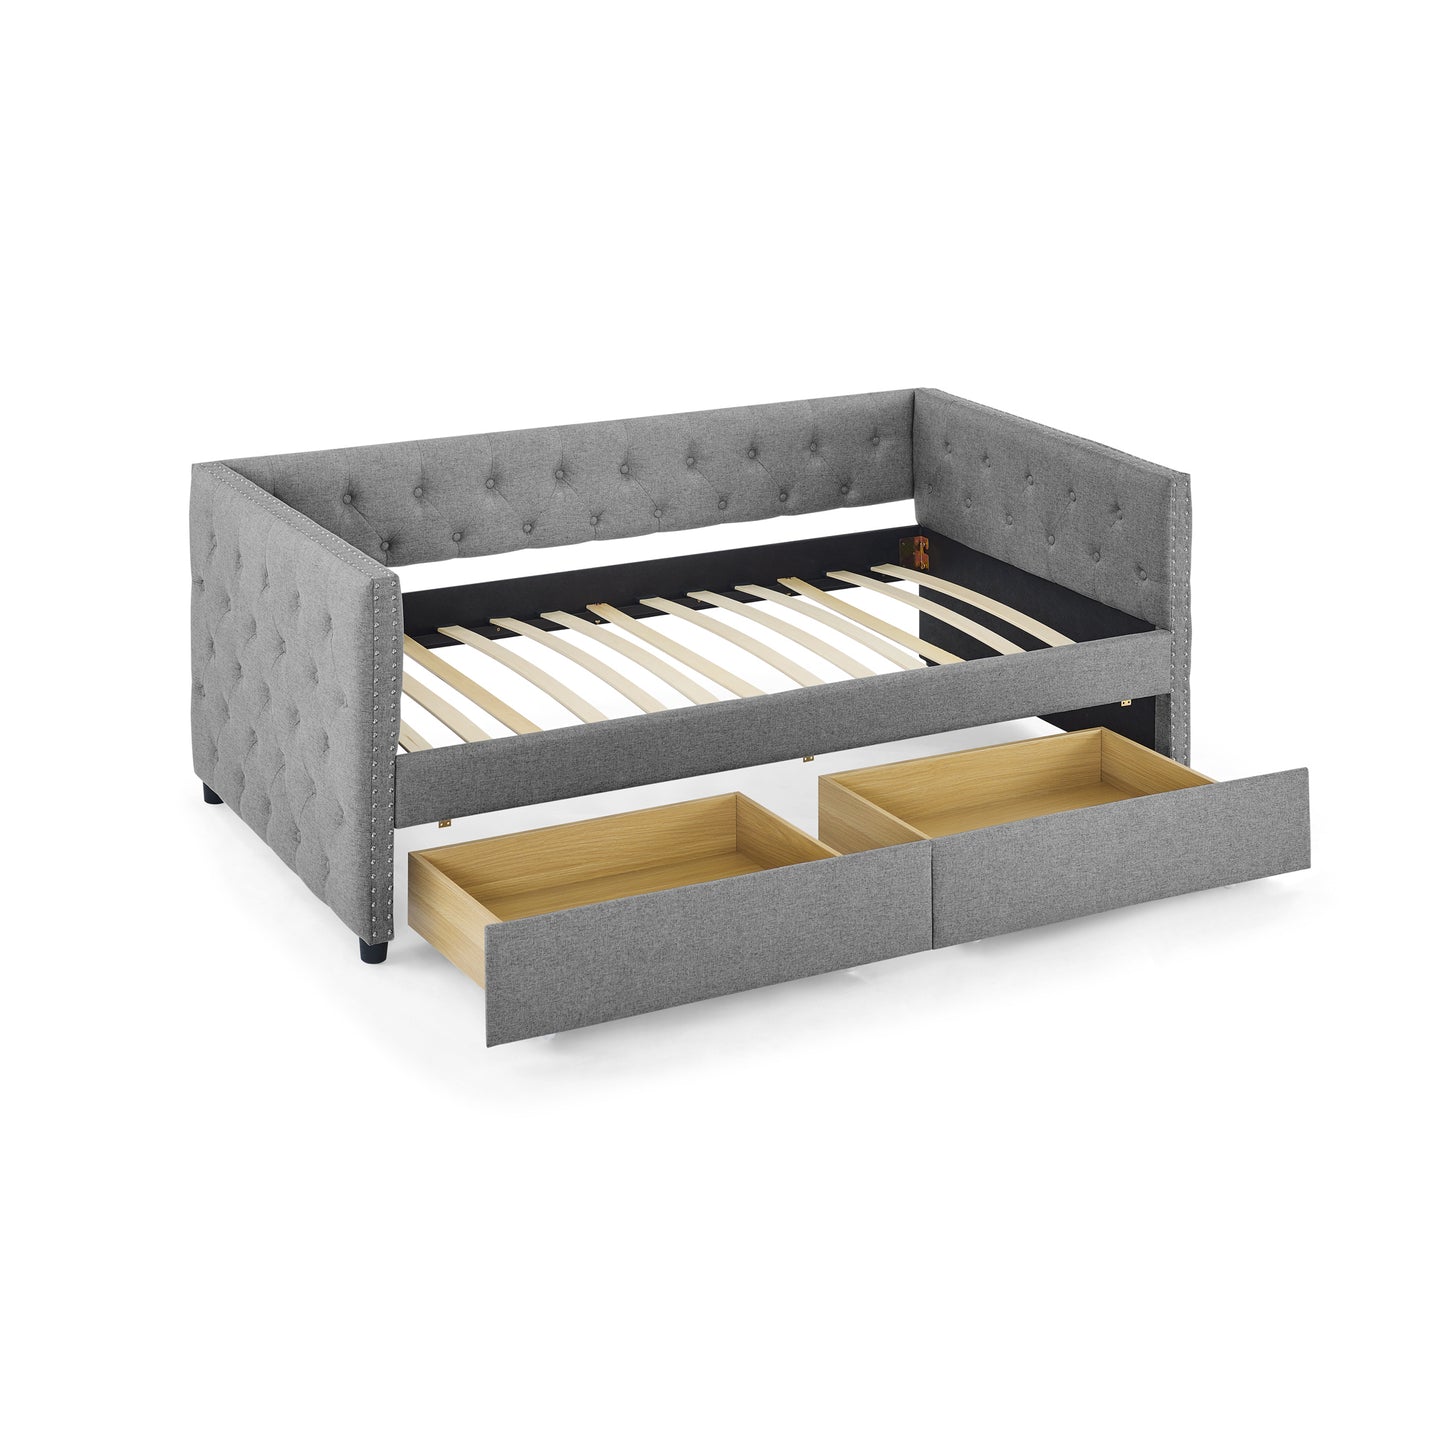 Upholstered Twin Size Daybed with Two Drawers, with Button and Copper Nail on Square Arms, Grey (82.75"x43"x30.75")